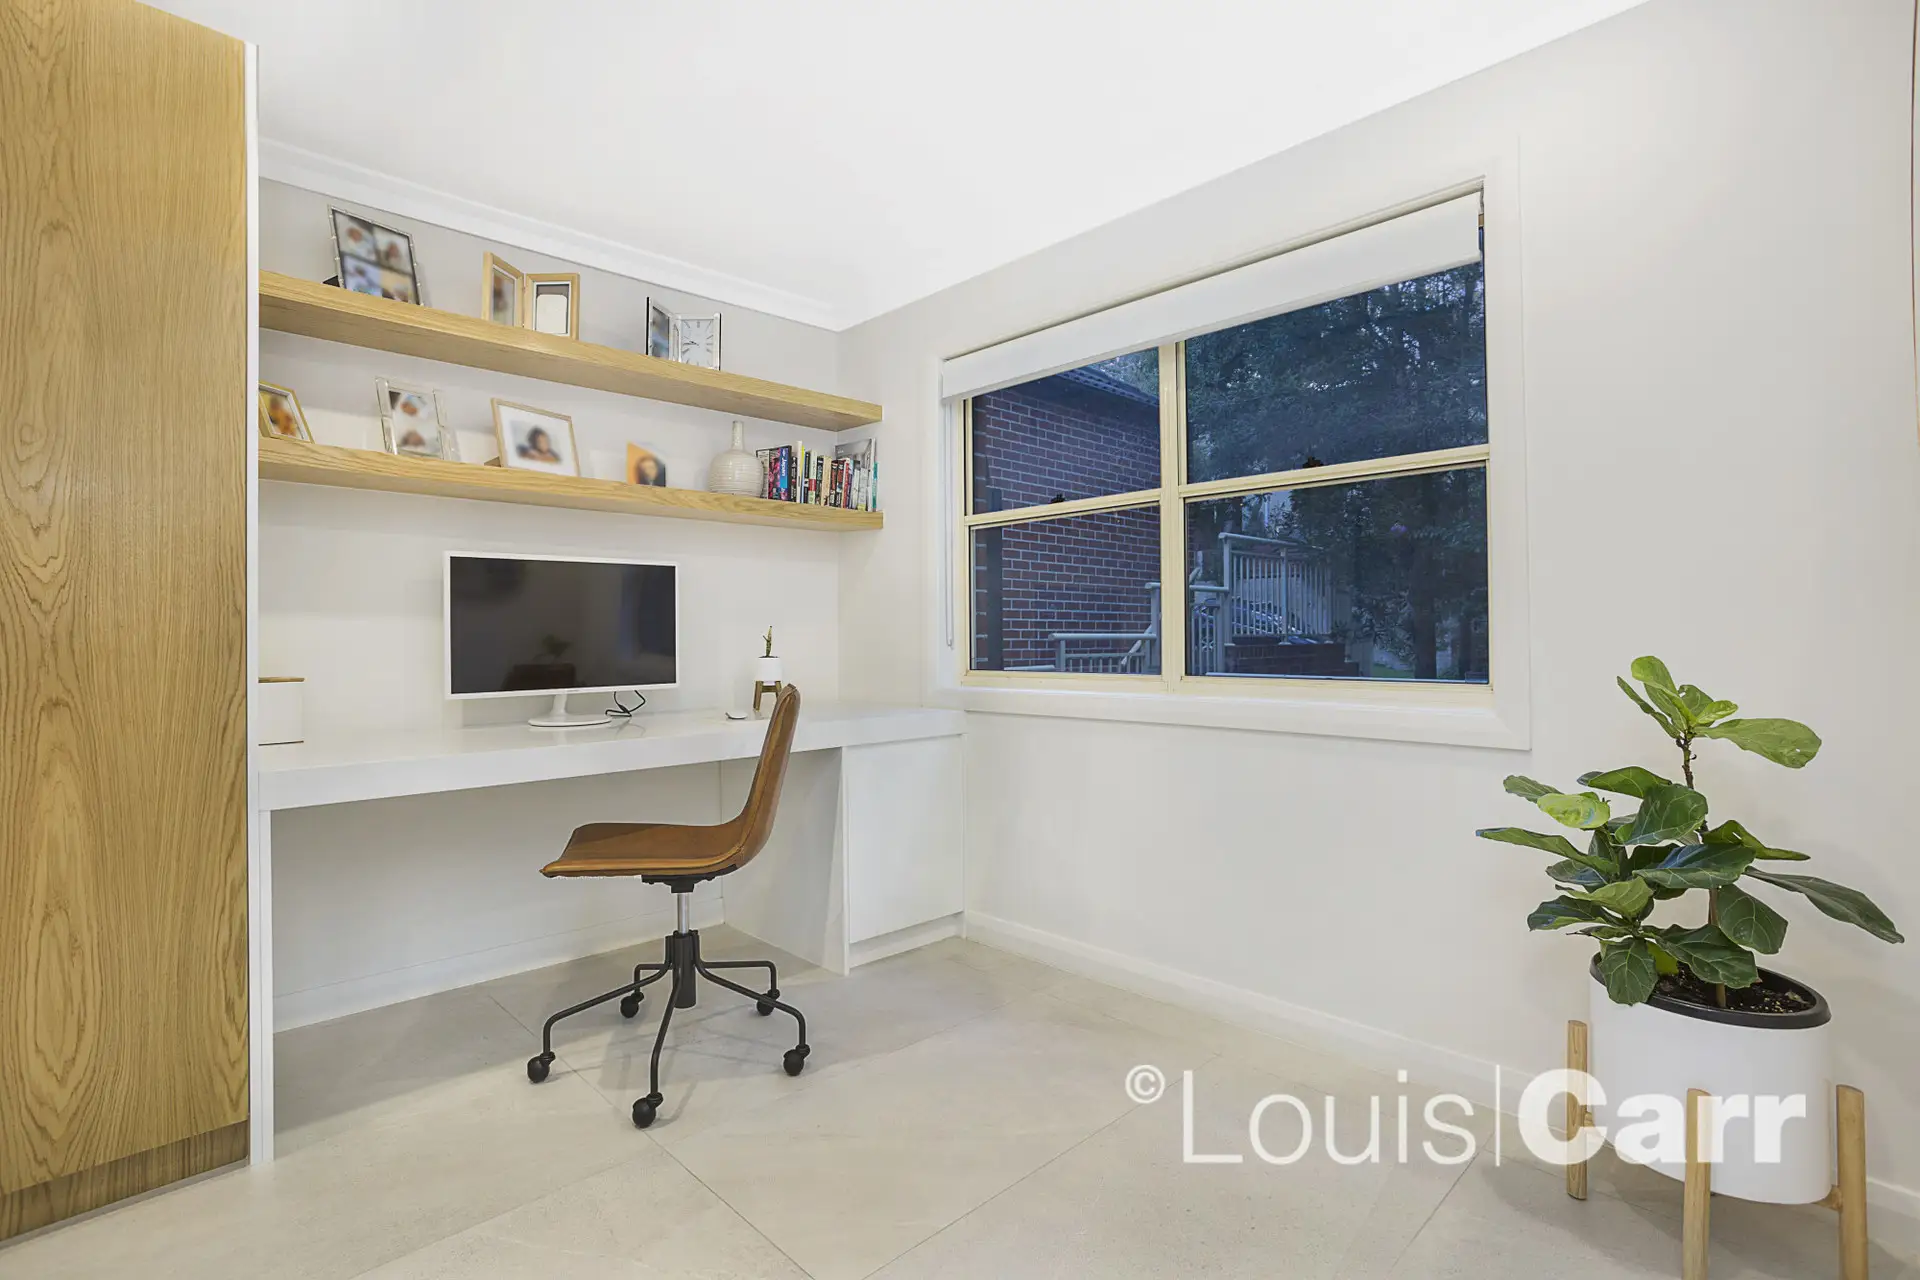 Photo #8: 5a Neptune Place, West Pennant Hills - Sold by Louis Carr Real Estate